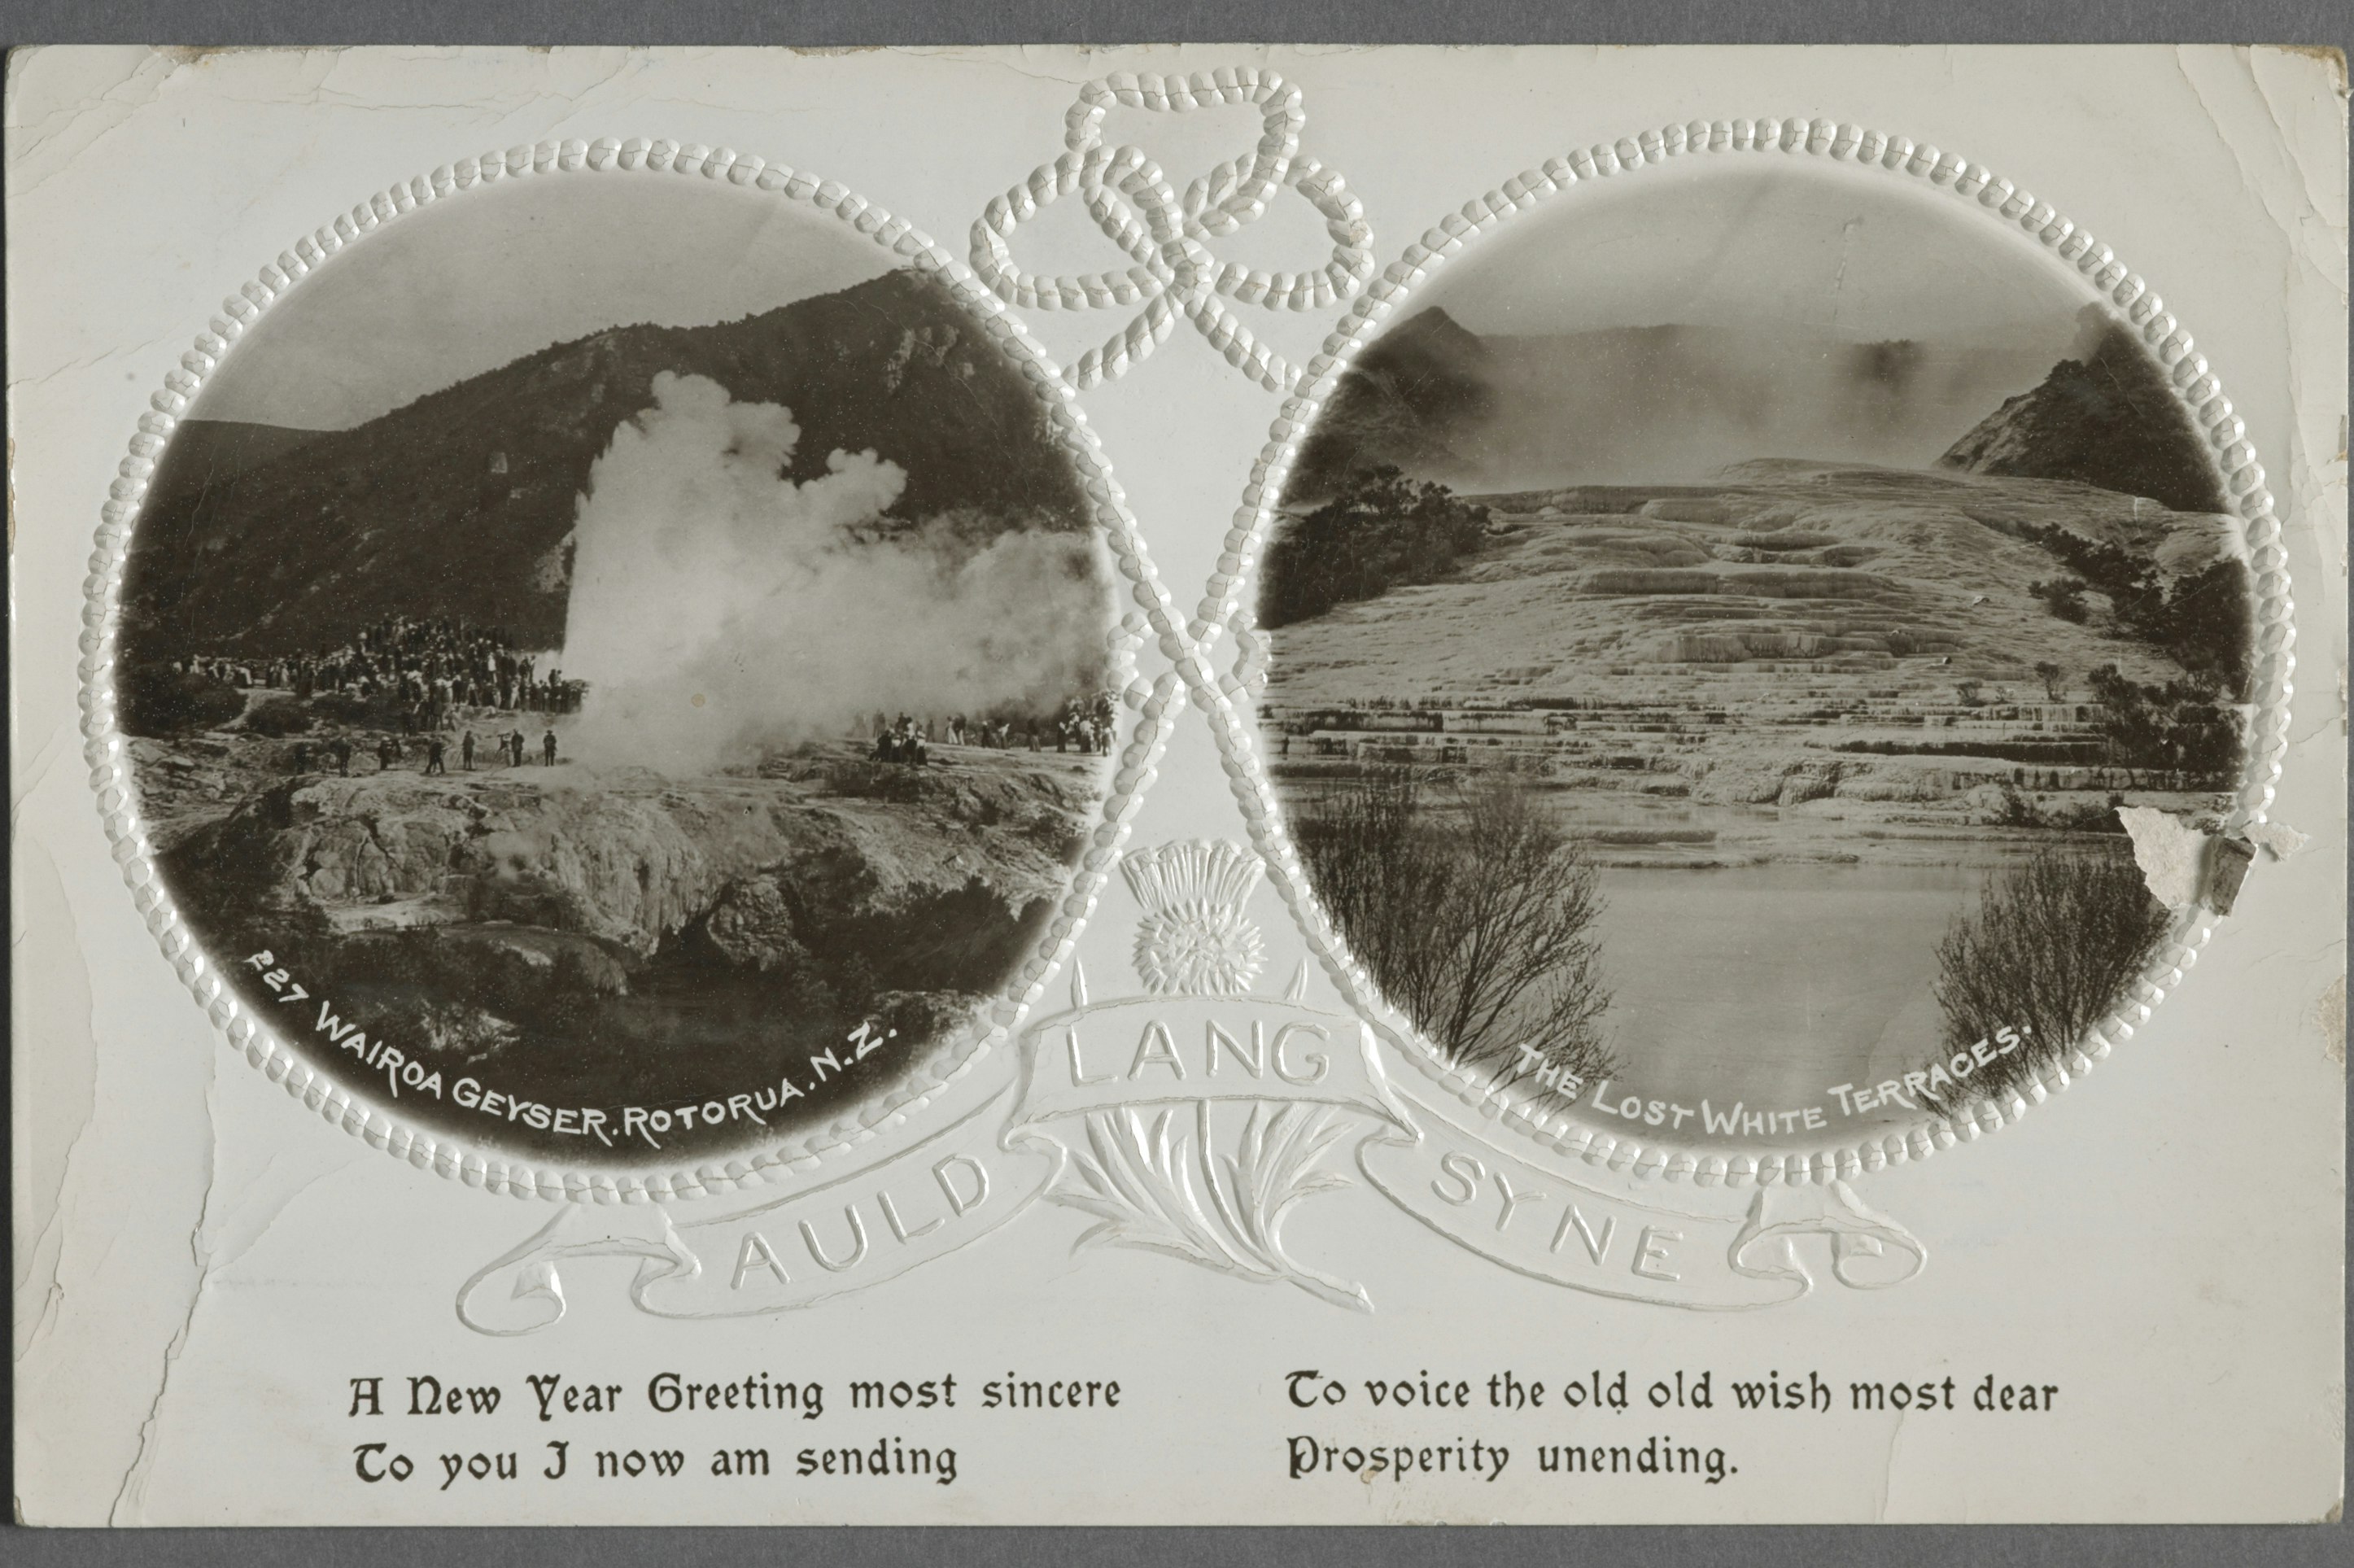 Two round images on a card. One with a geyser and one with the pink and white terraces.